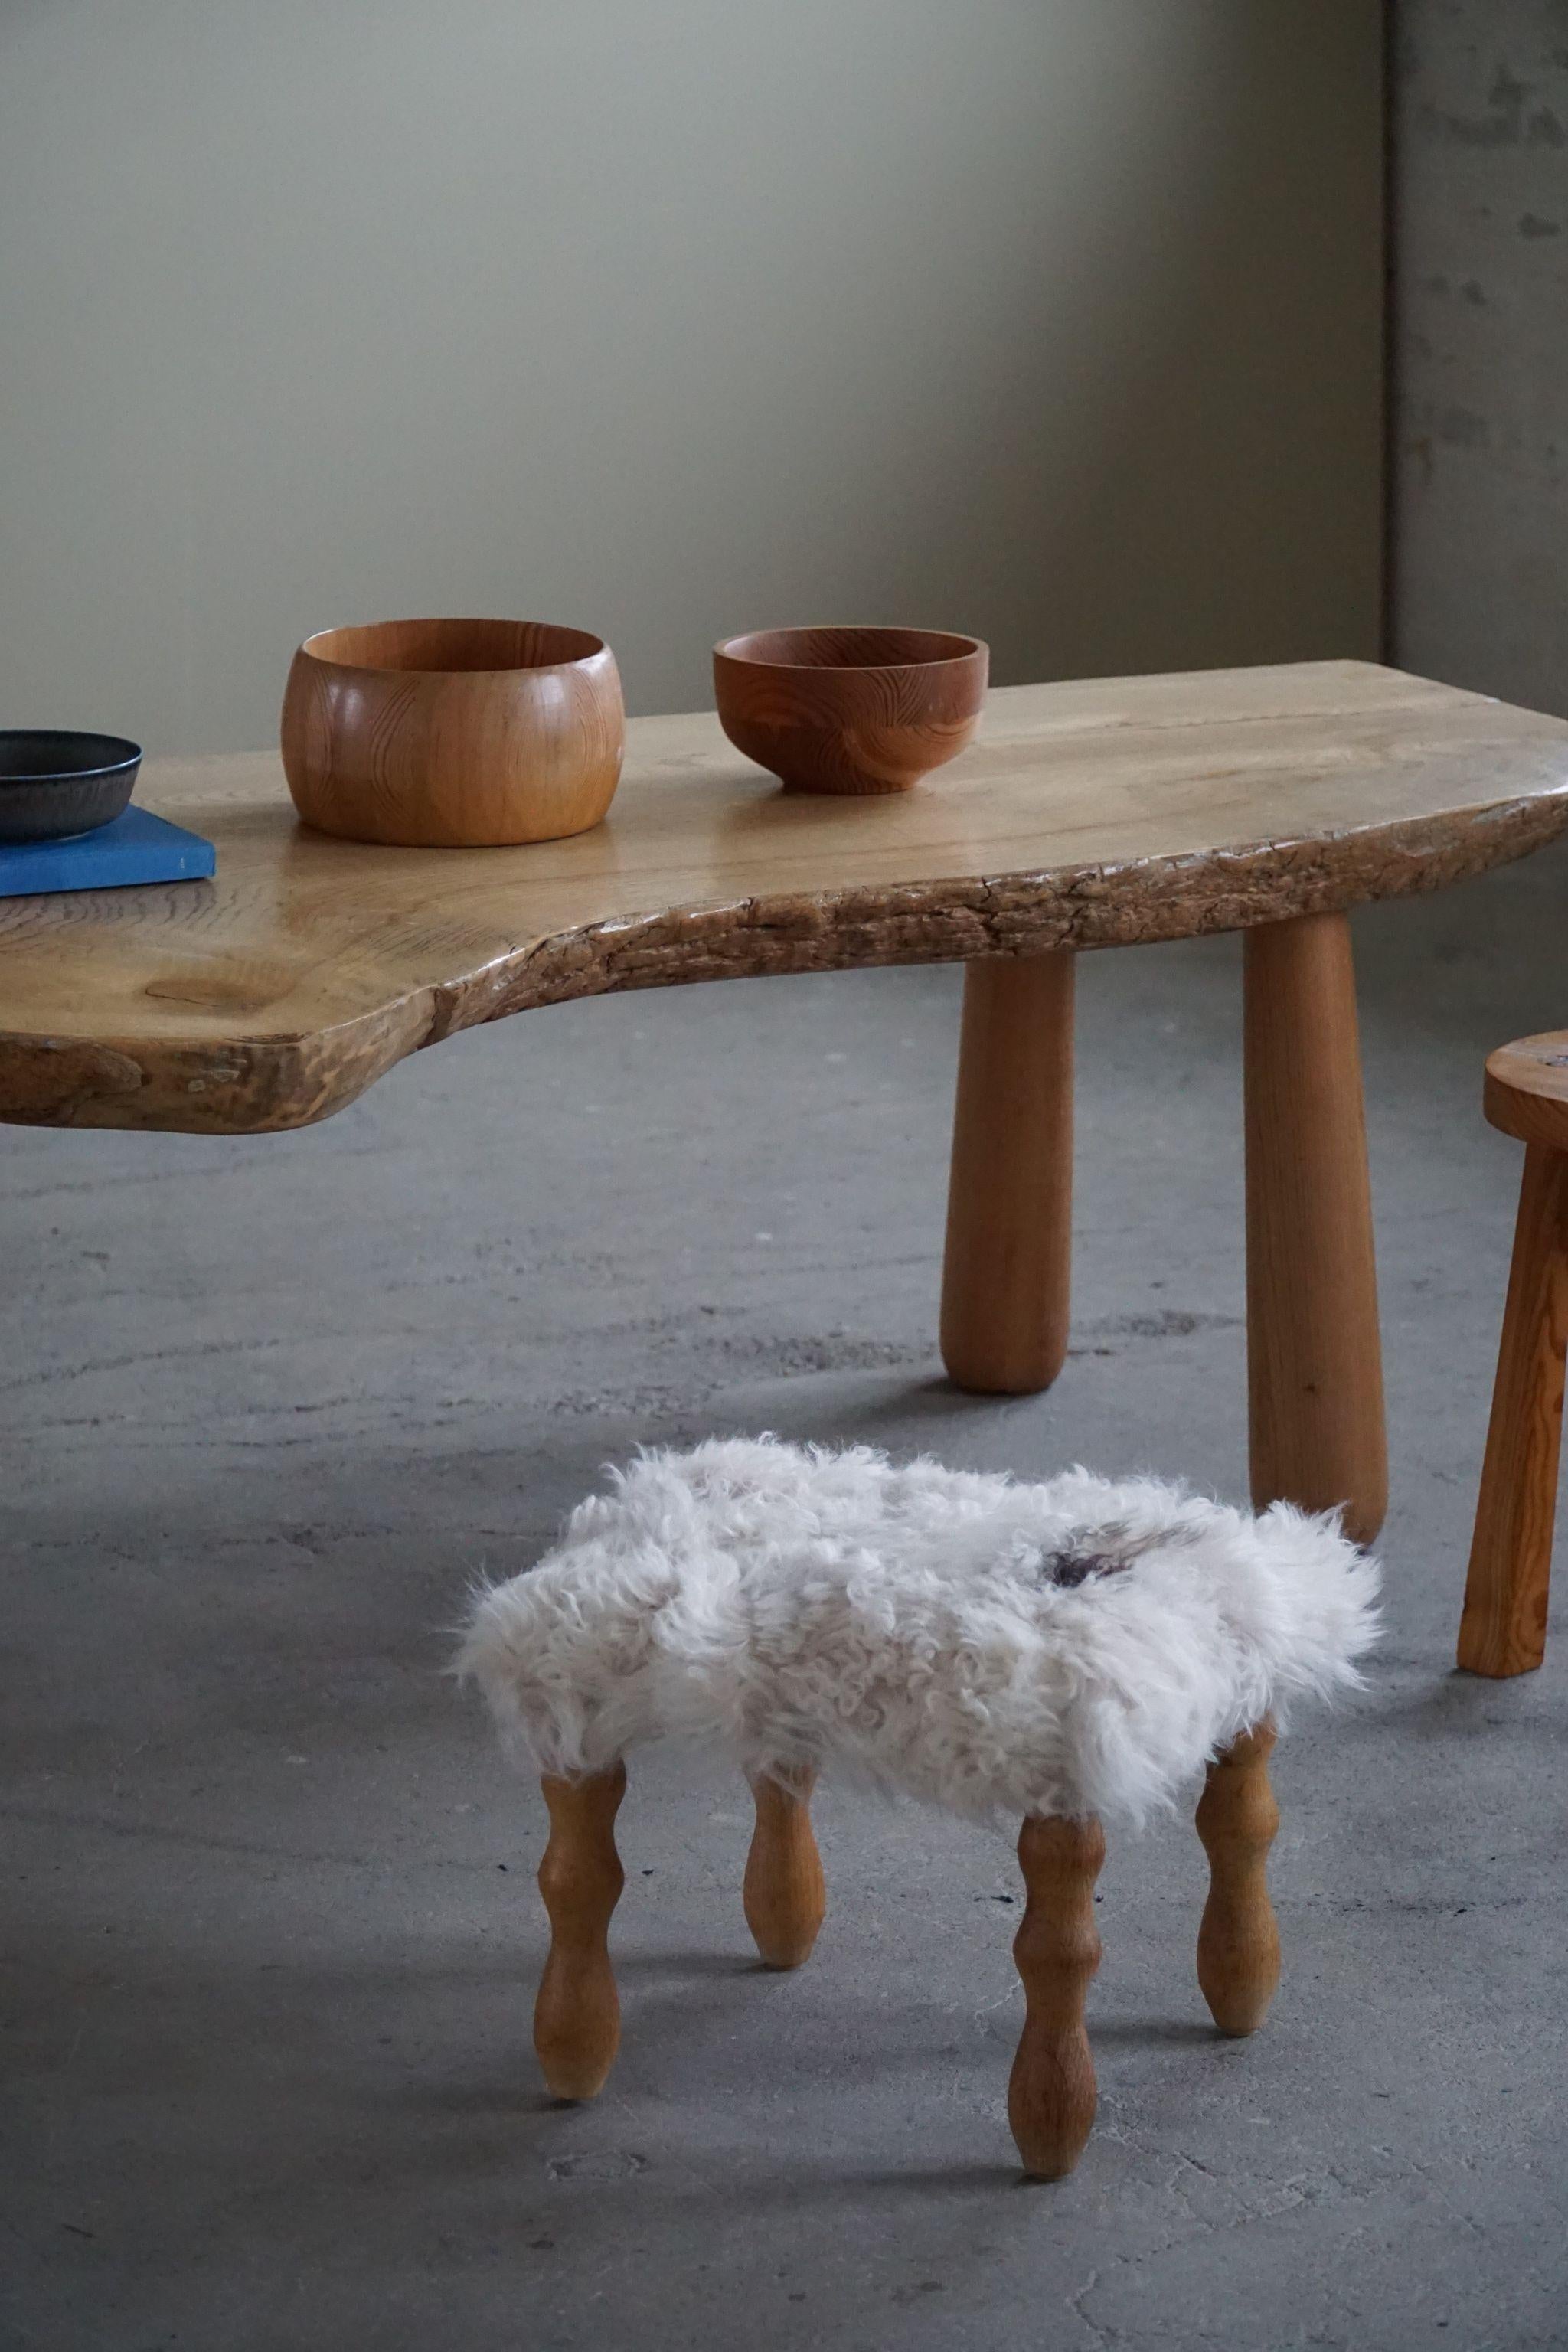 Danish modern stool in oak with curly legs, reupholstered seat long haired lambswool. Made by a Danish Cabinetmaker in ca 1950s.

A great object for the Scandinavian interior home. The overall impression is really good.

With a heavy focus on